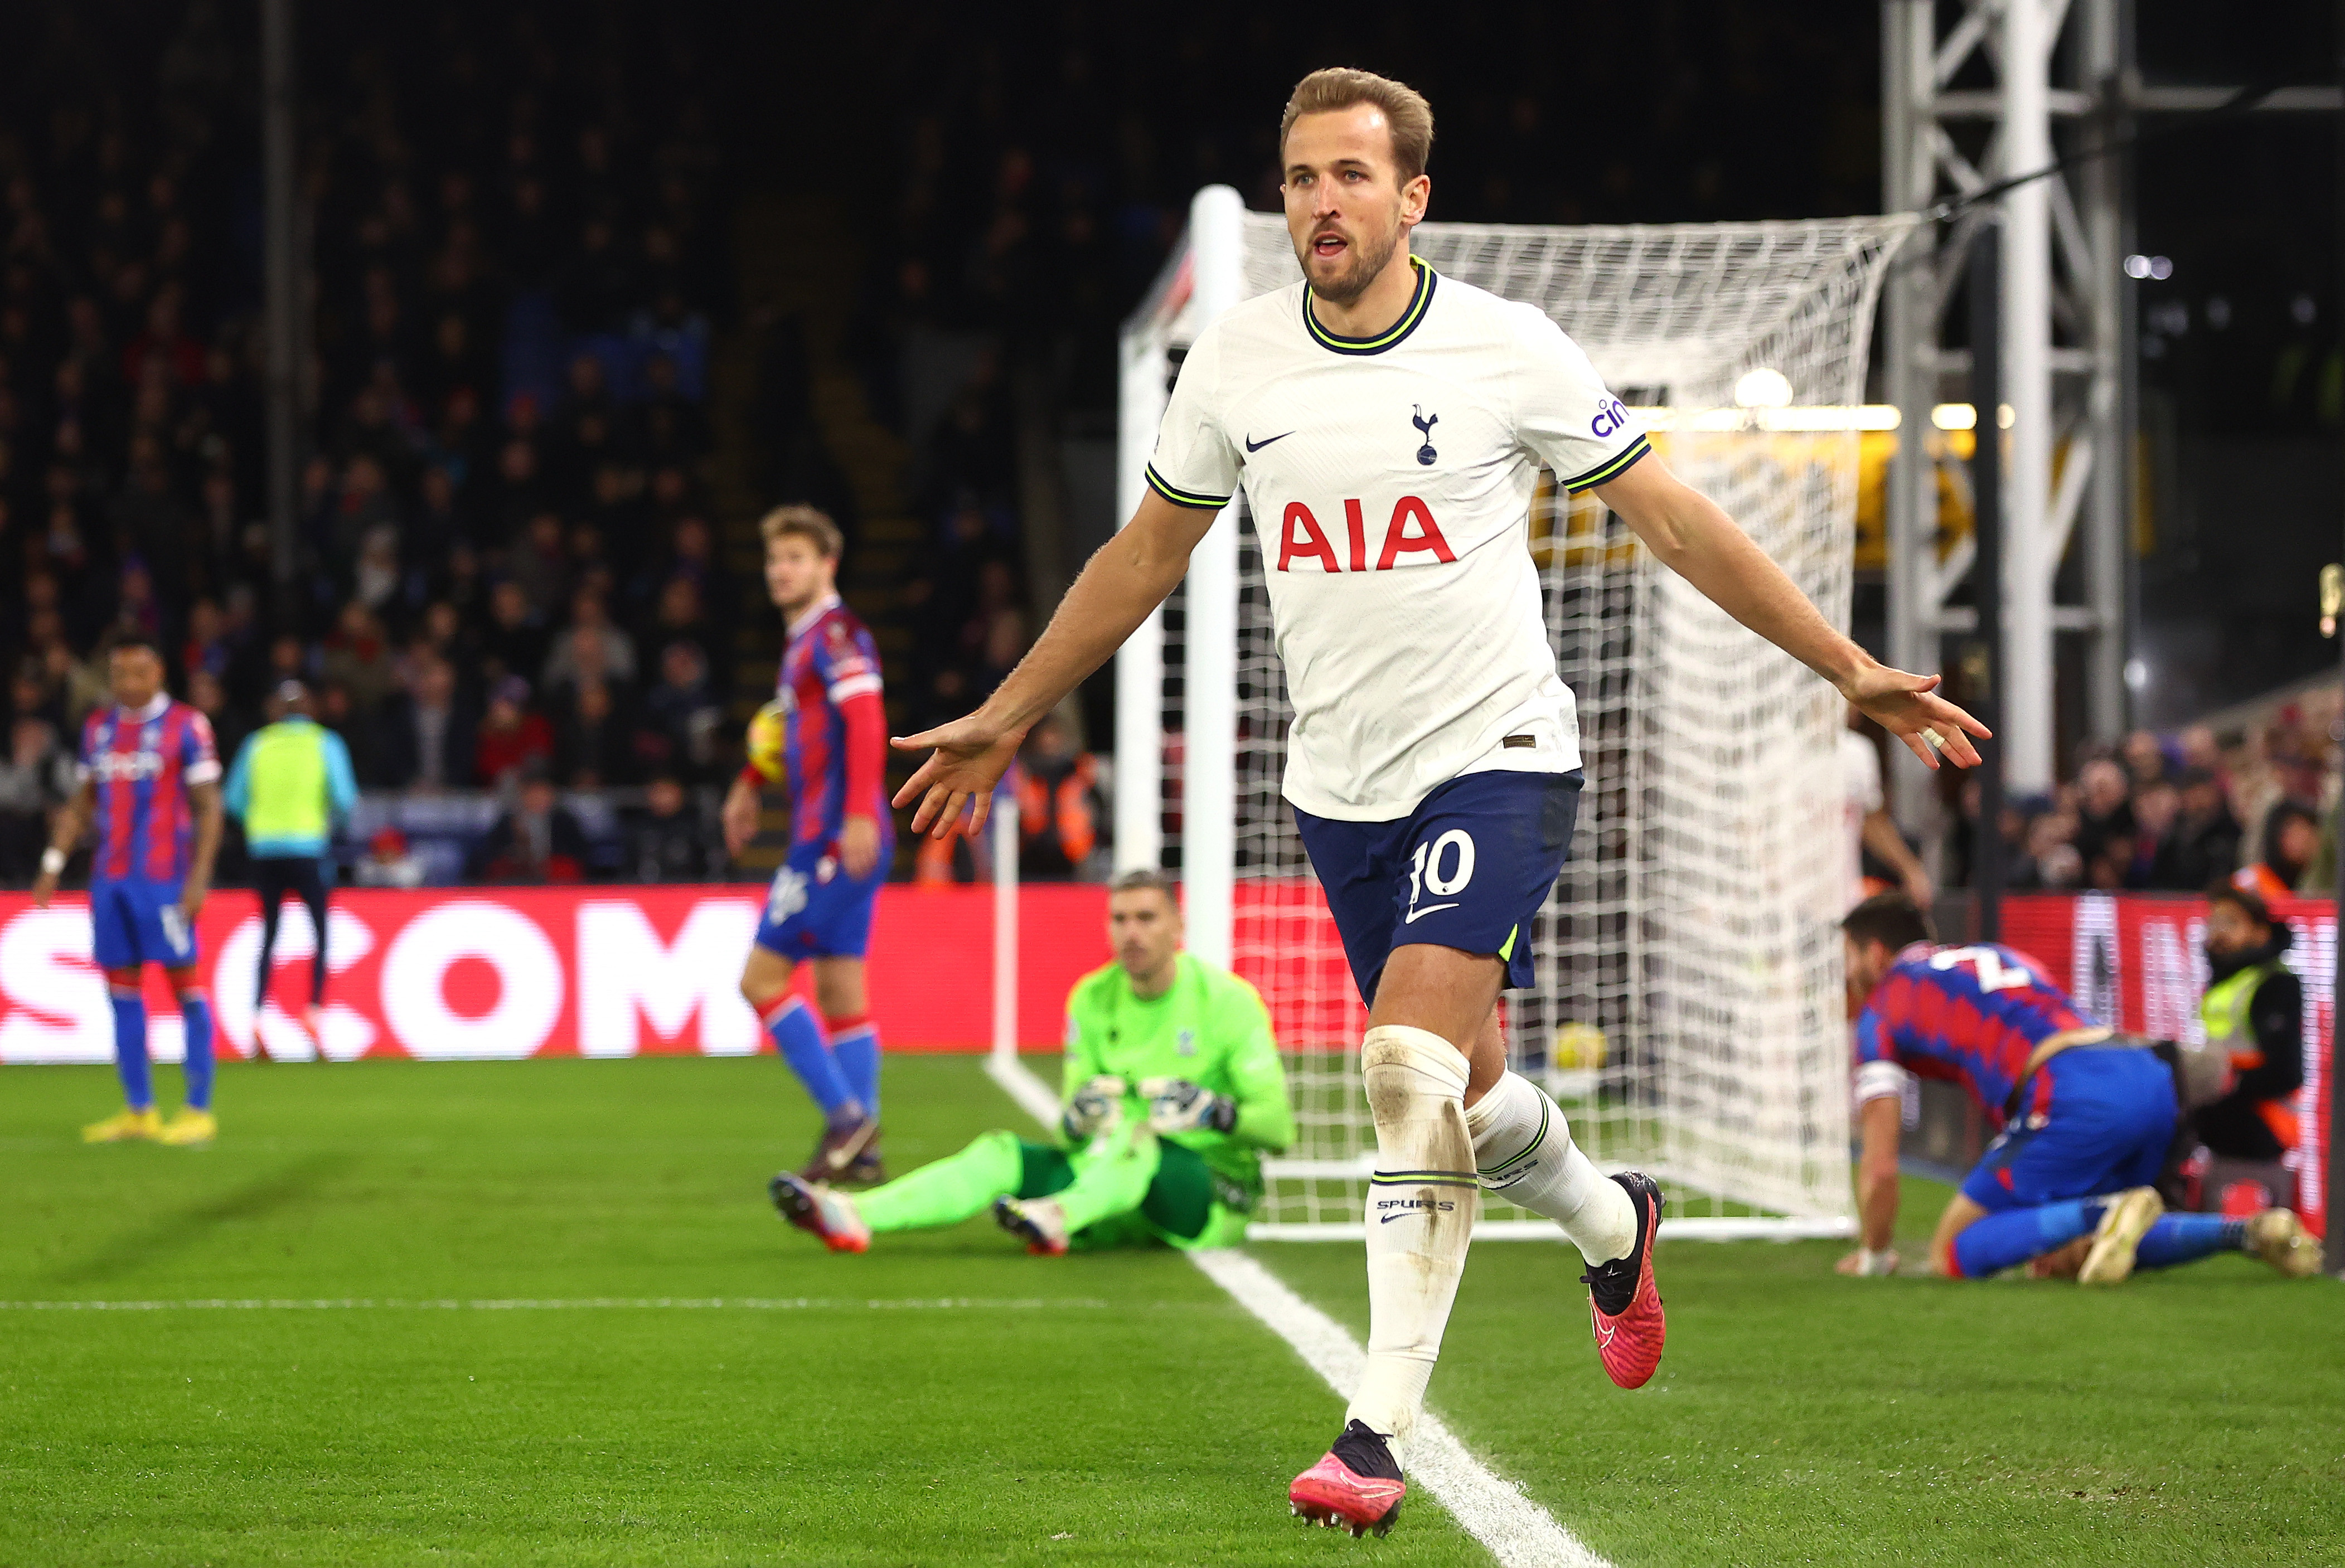 Fulham 0-1 Tottenham: Harry Kane equals Jimmy Greaves record as